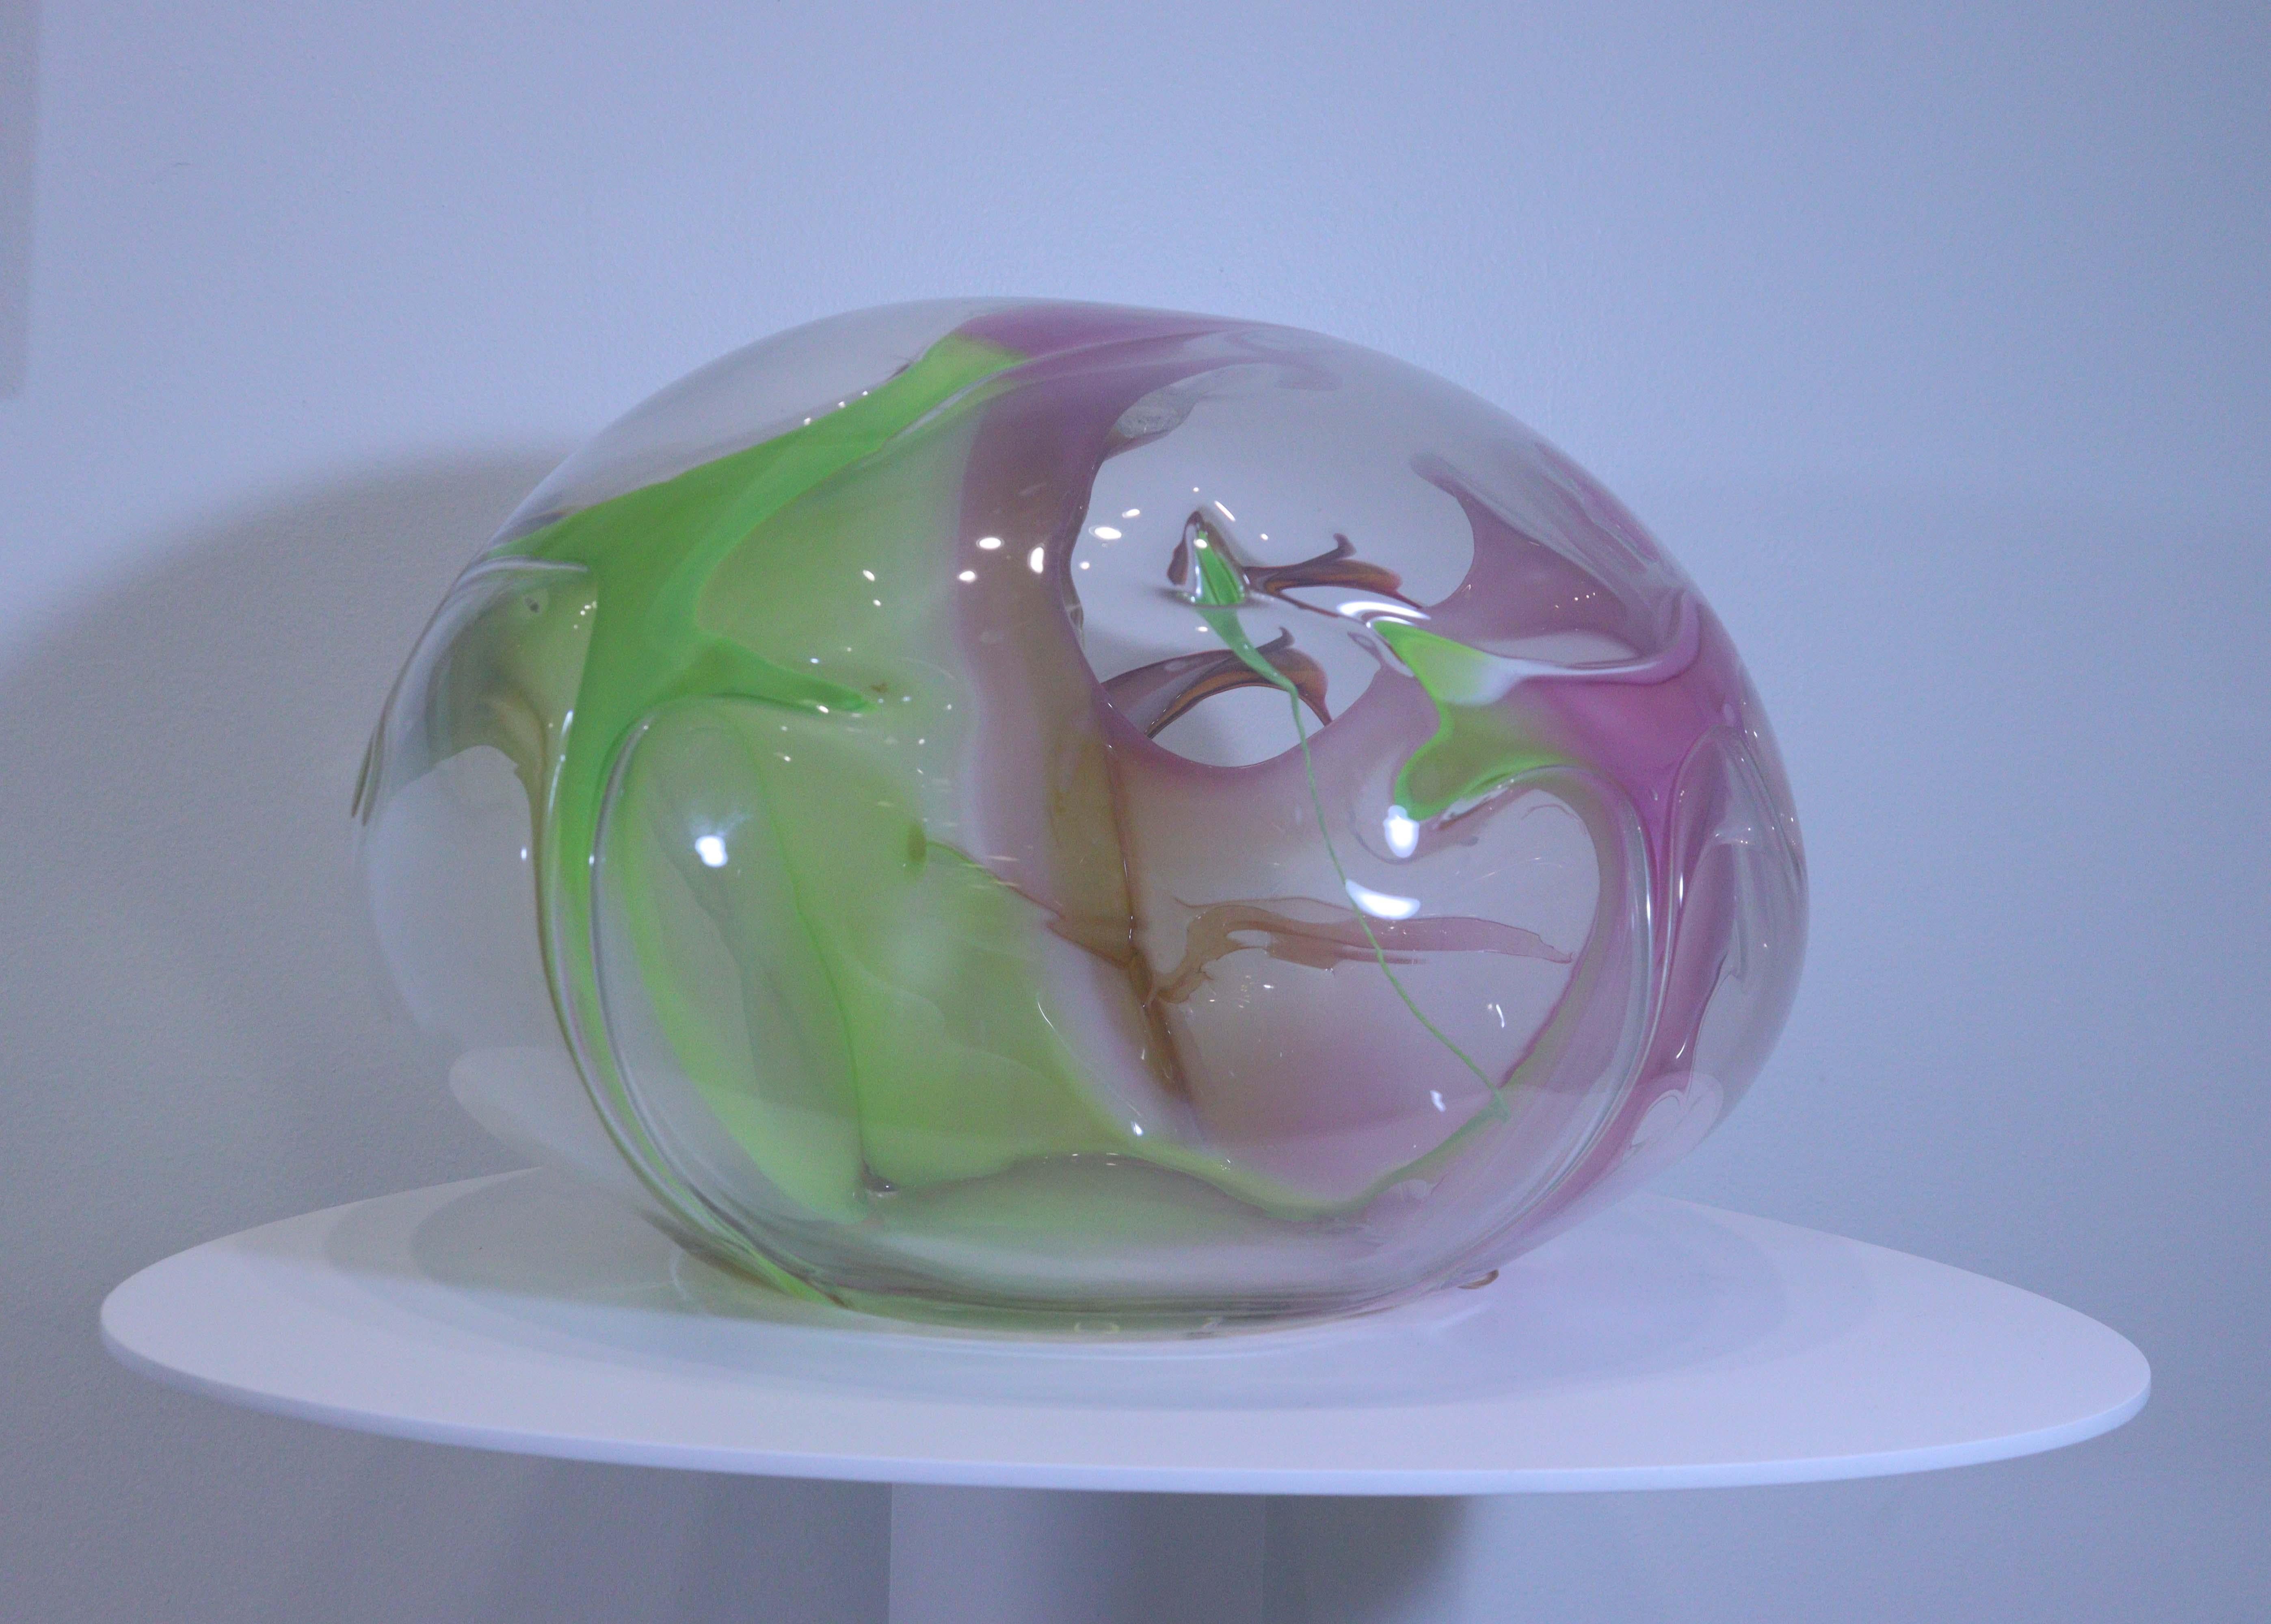 An amazing piece of art glass, this hand blown, glass orb sculpture is biomorphic and organic in nature with free form colors running throughout. Created by Peter Bramhall, this orb is signed and dated by the artist on the underside. An amazing,